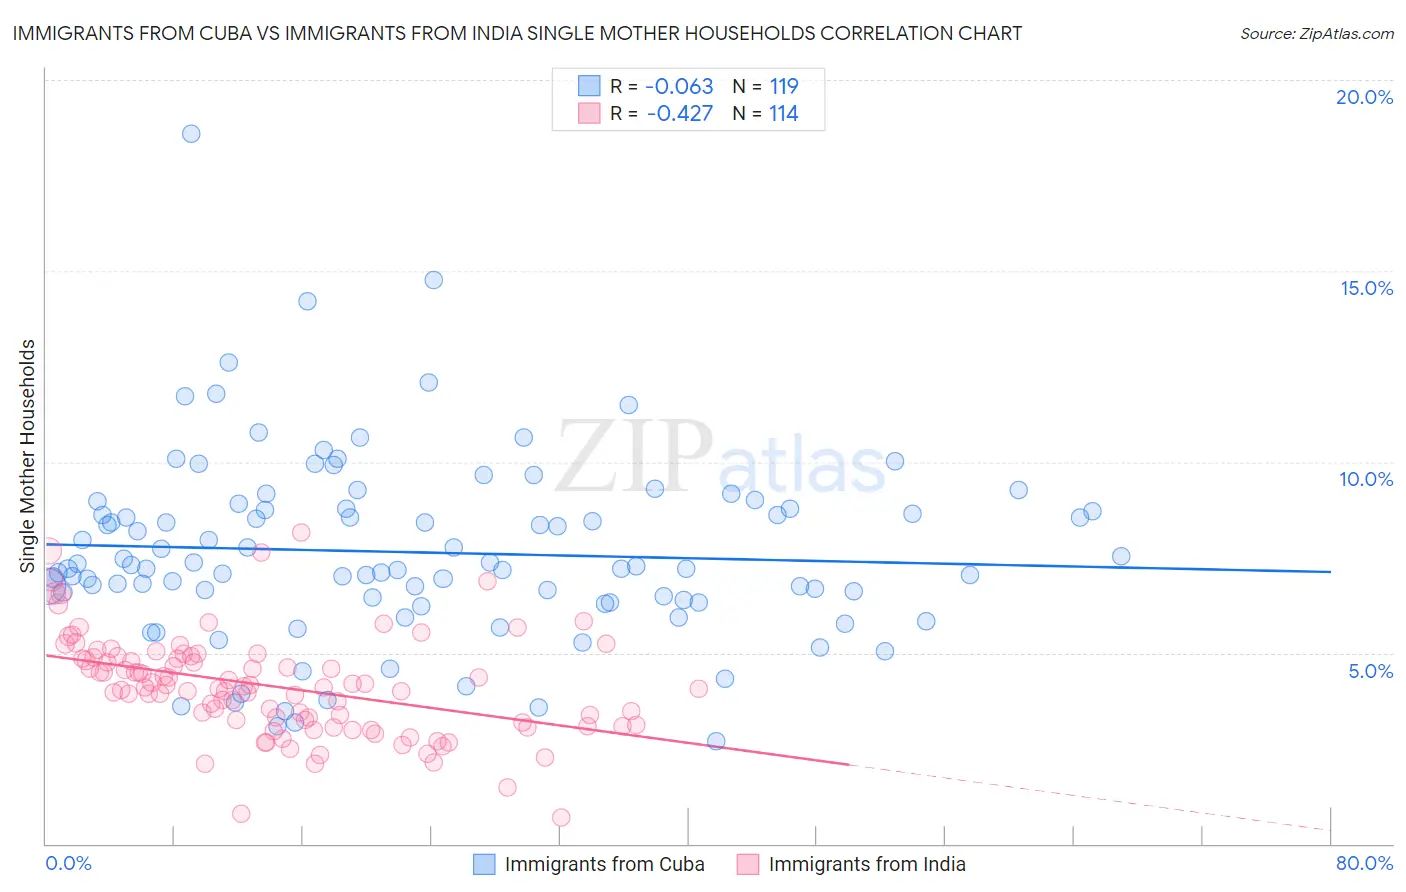 Immigrants from Cuba vs Immigrants from India Single Mother Households